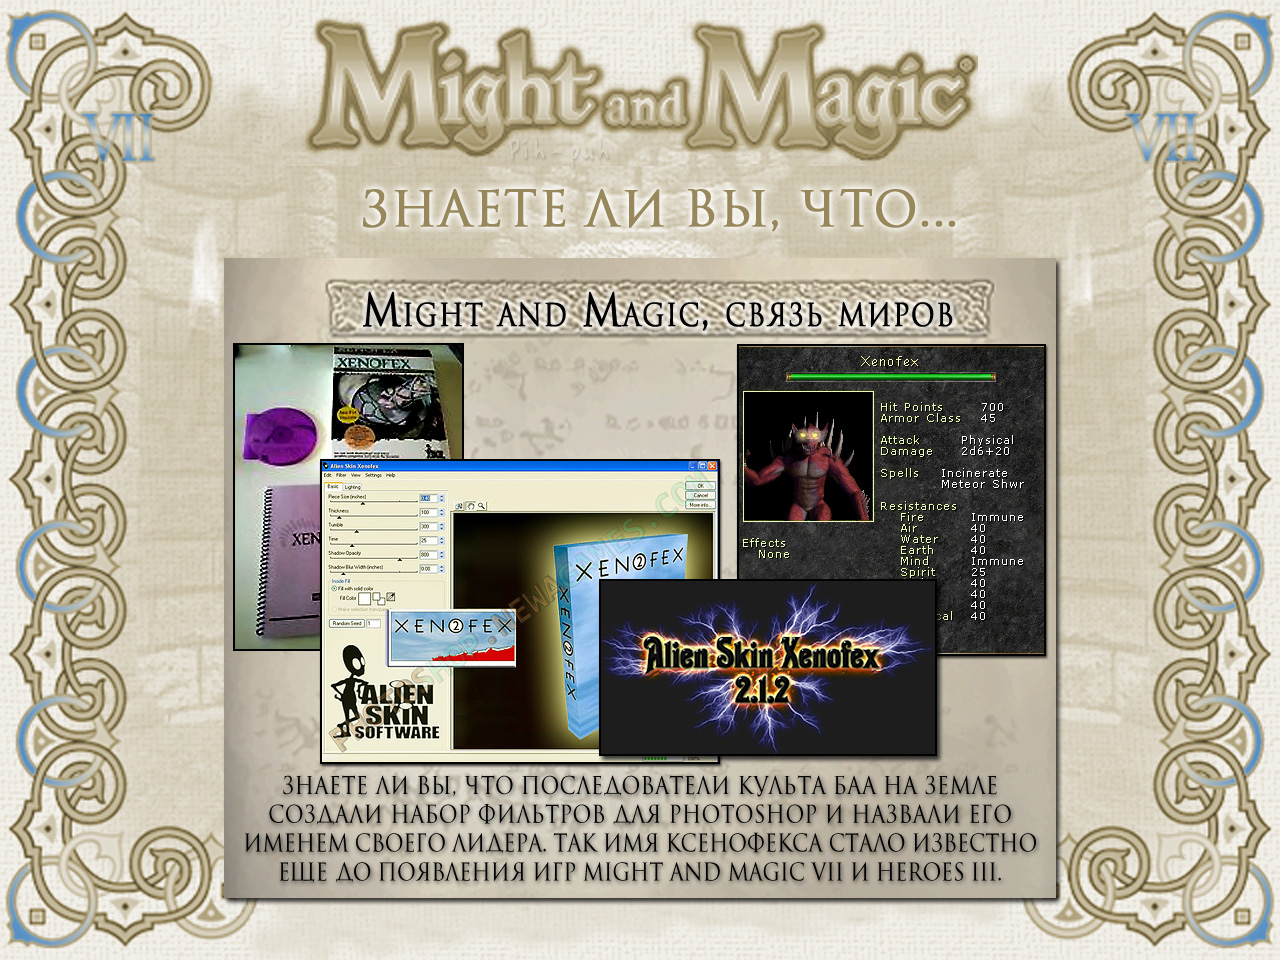 MIGHT AND MAGIC VII ().